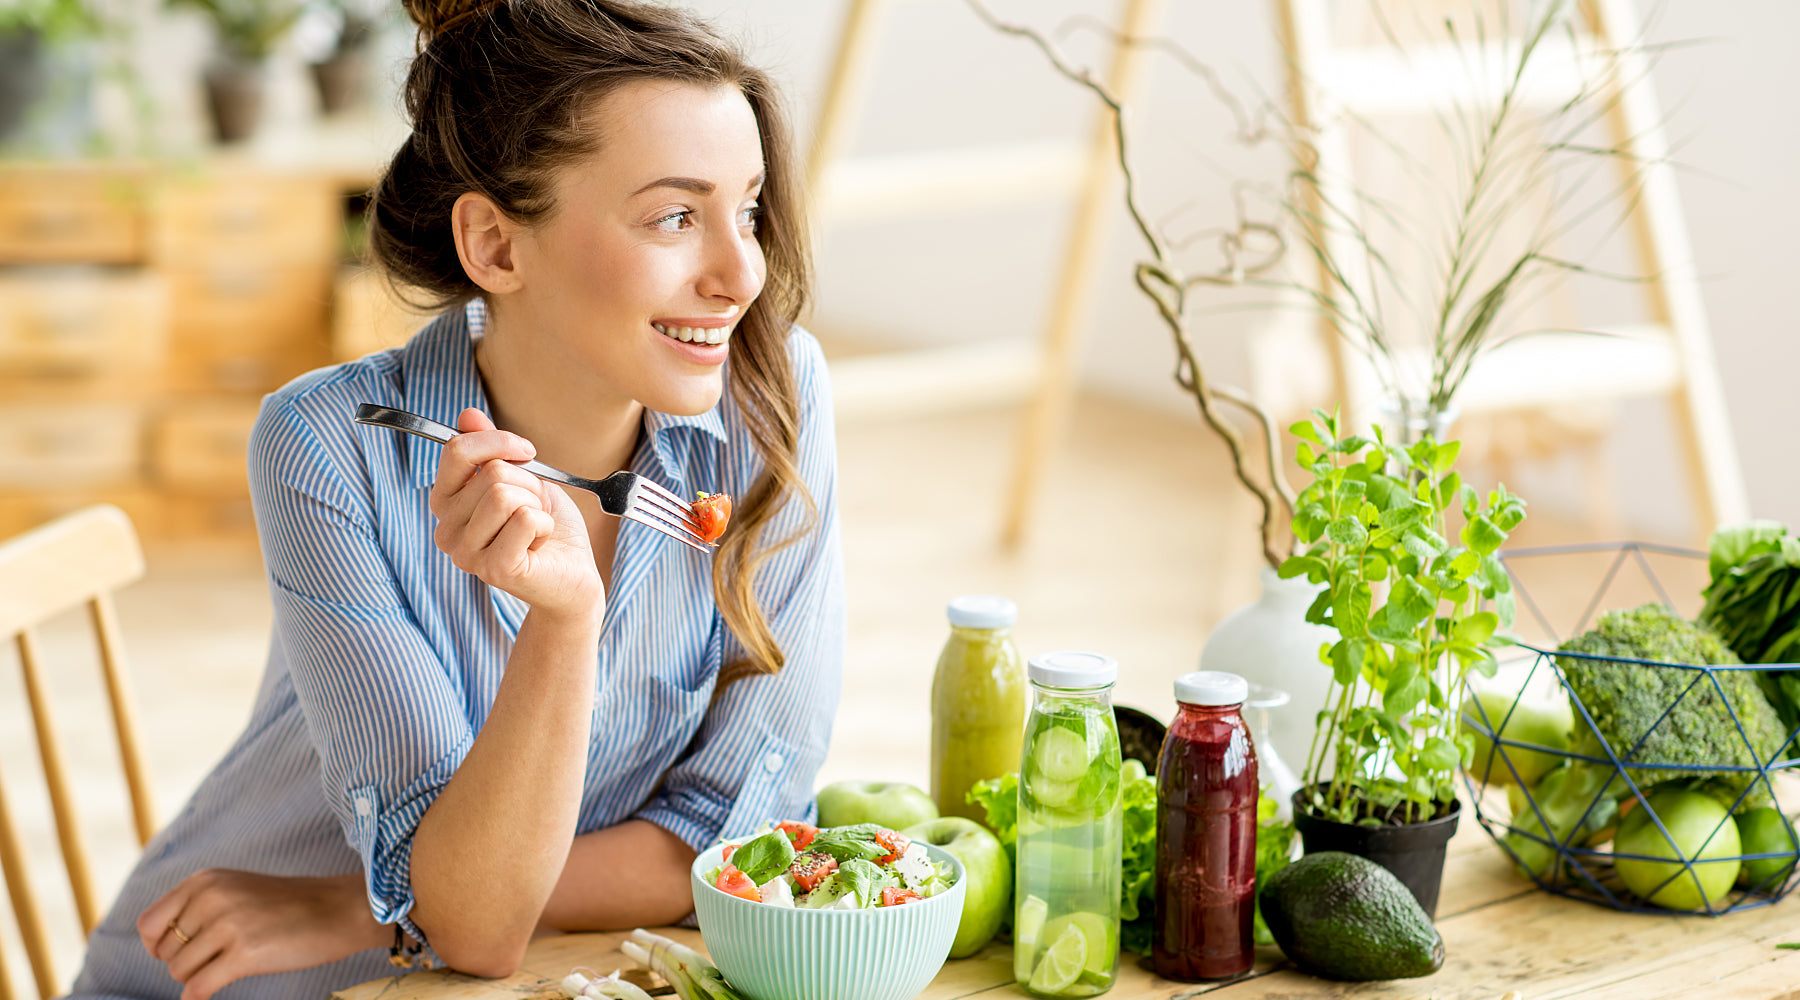 Woman seated at a table covered in green vegetables, eating a bowl of salad